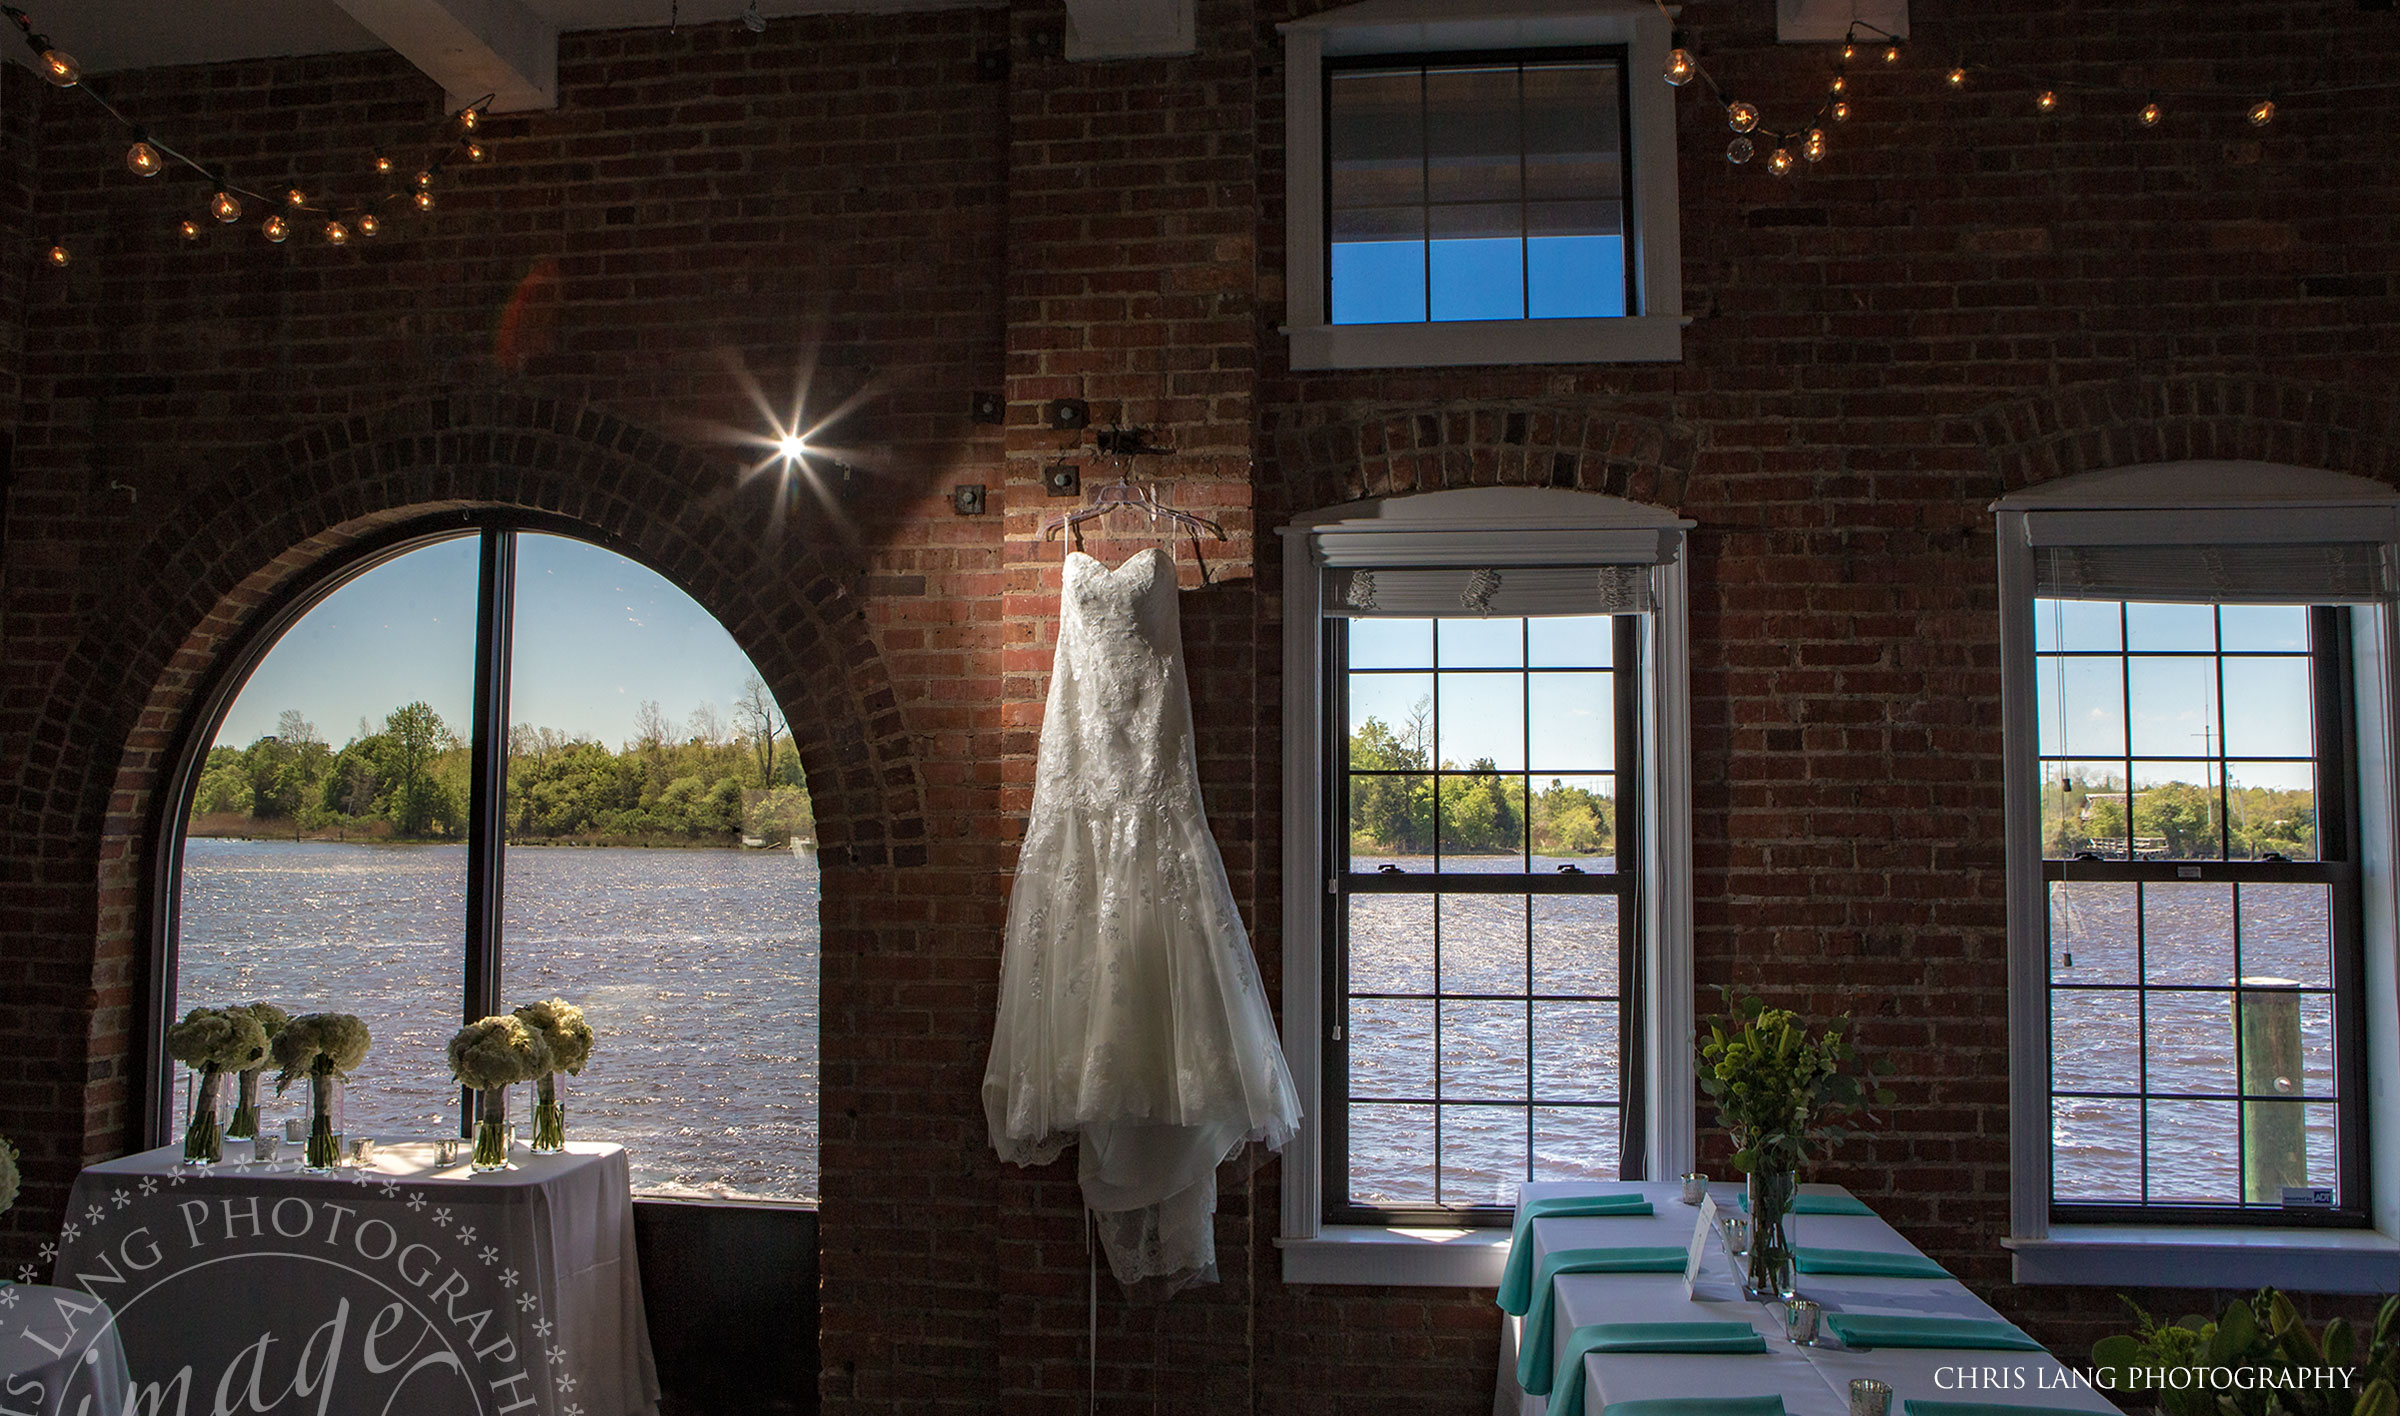 Downtown Wilmington NC Wedding Venues - The River Room locarted on the Cape Fear River Waterfront - View of the Cape Fear River  looking outside the windows  of the River Room